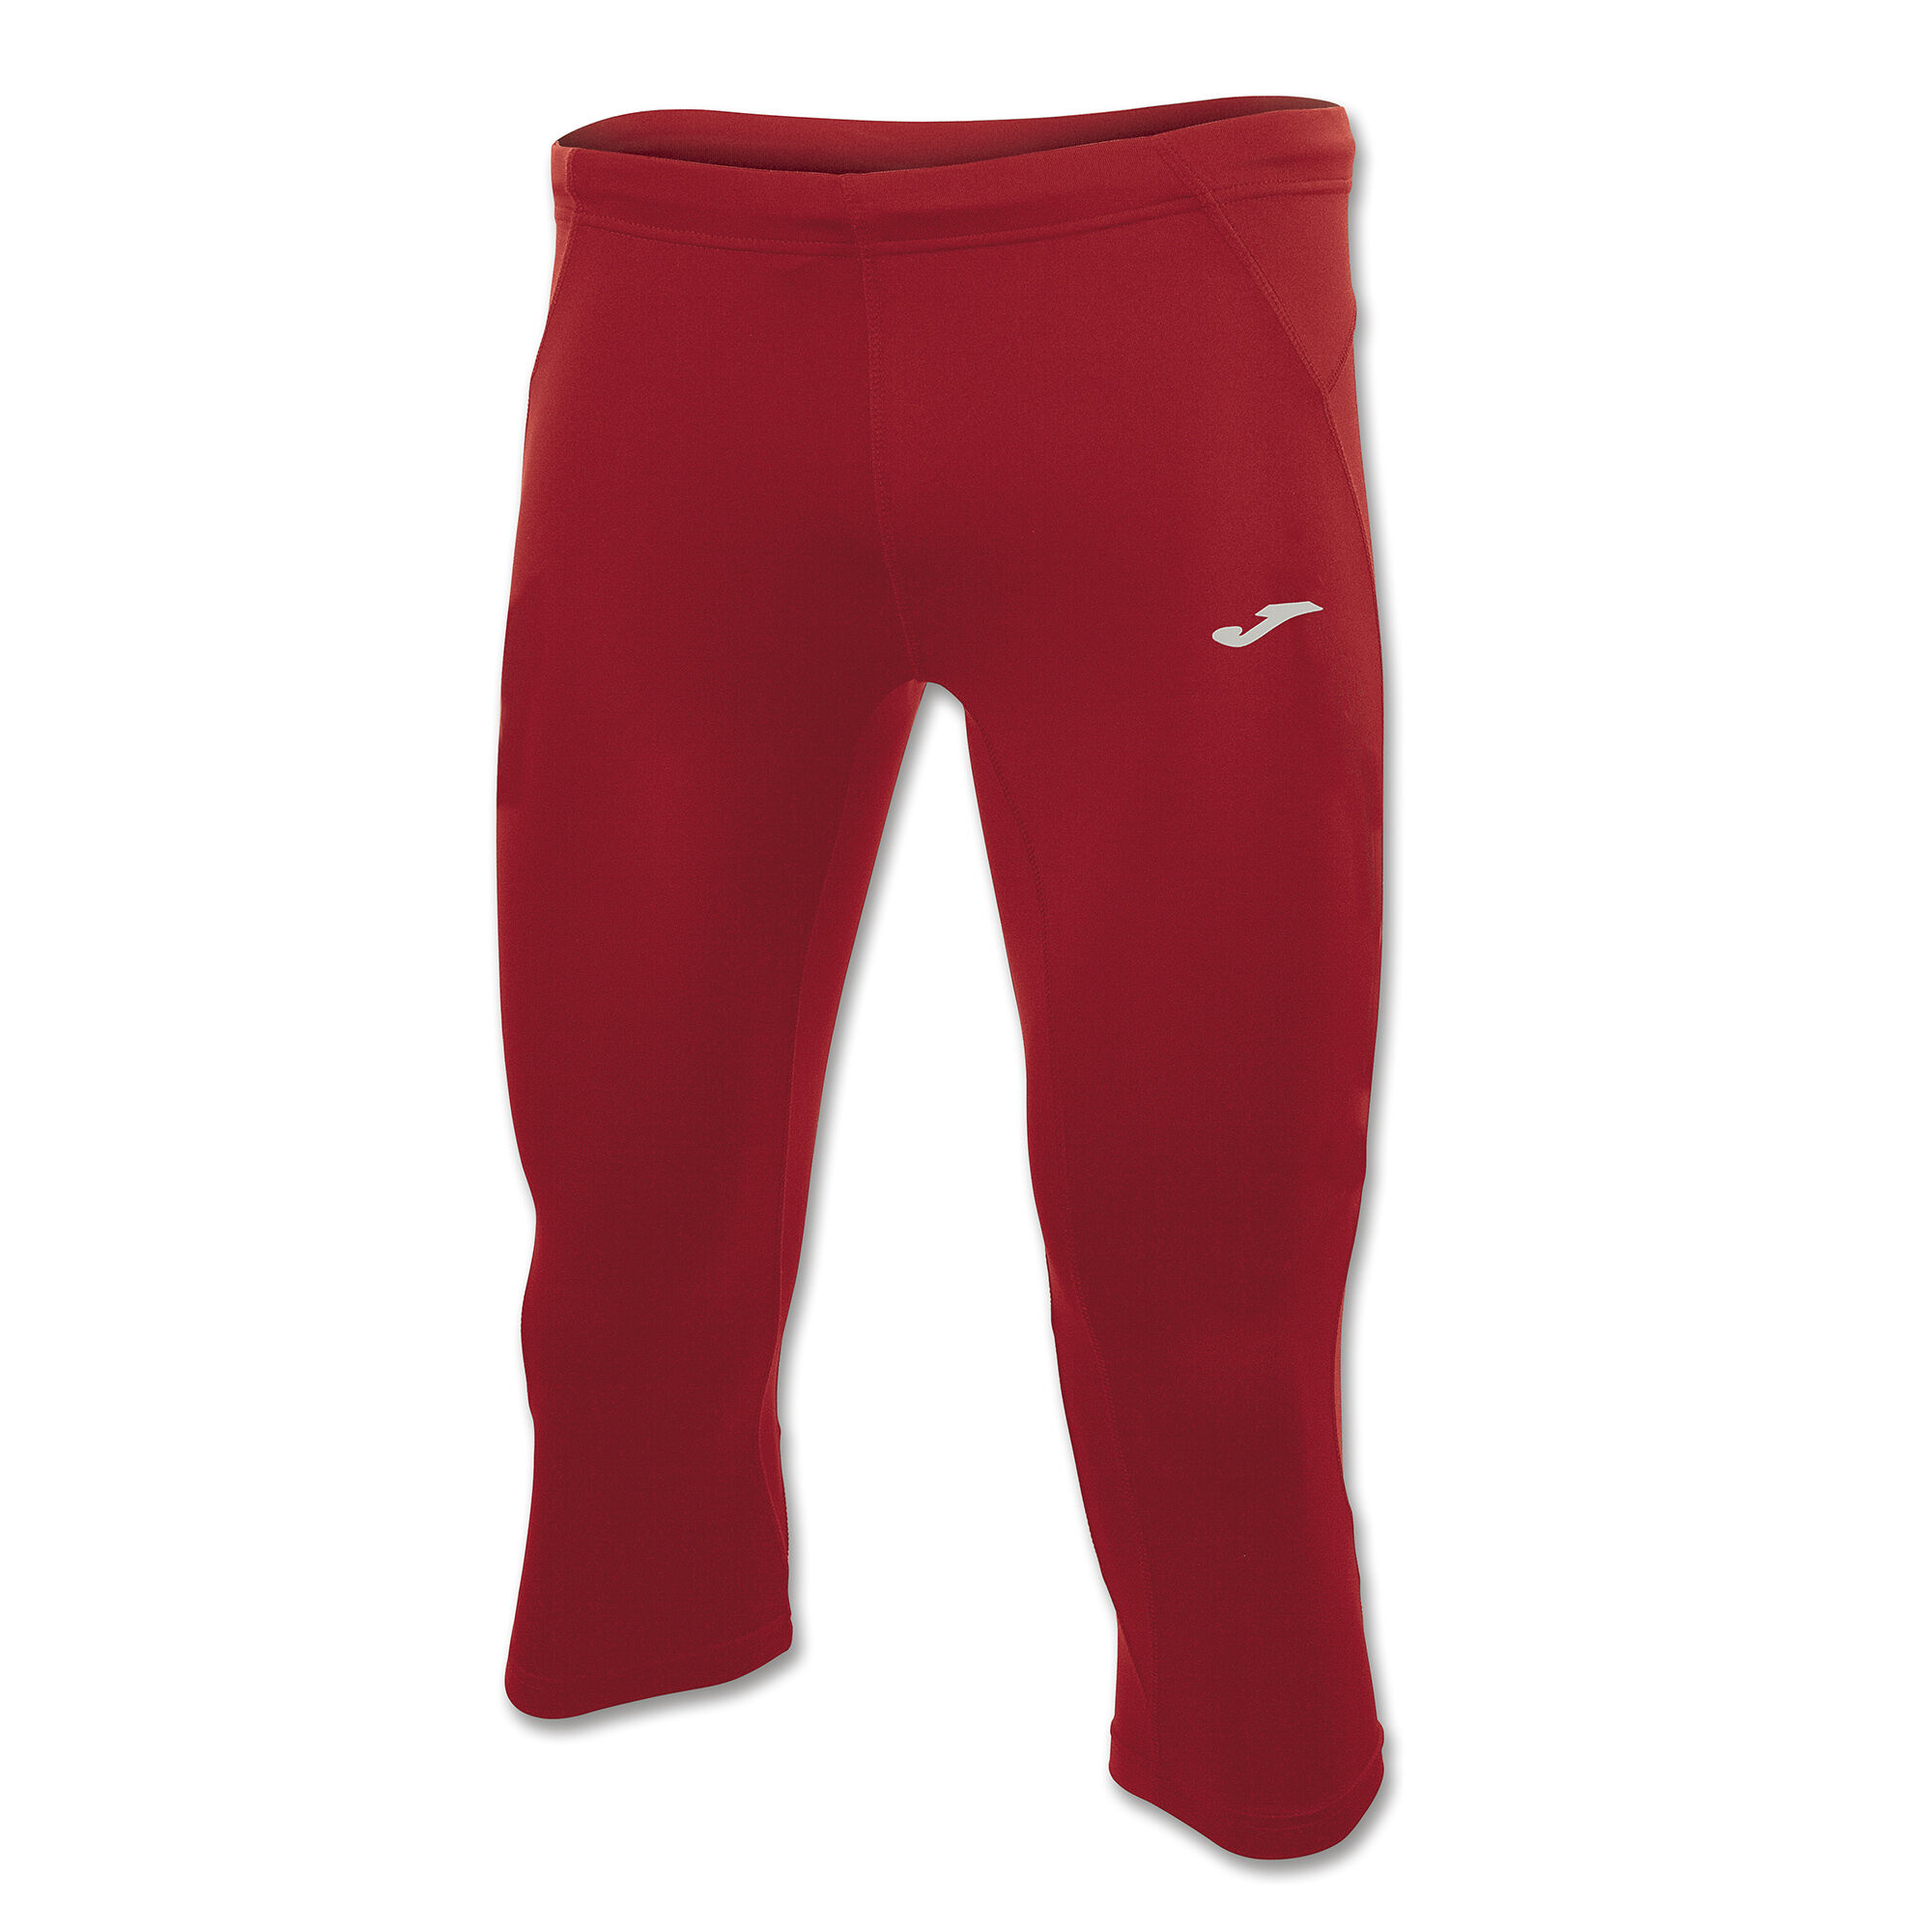 Legging 3/4 homme Record rouge